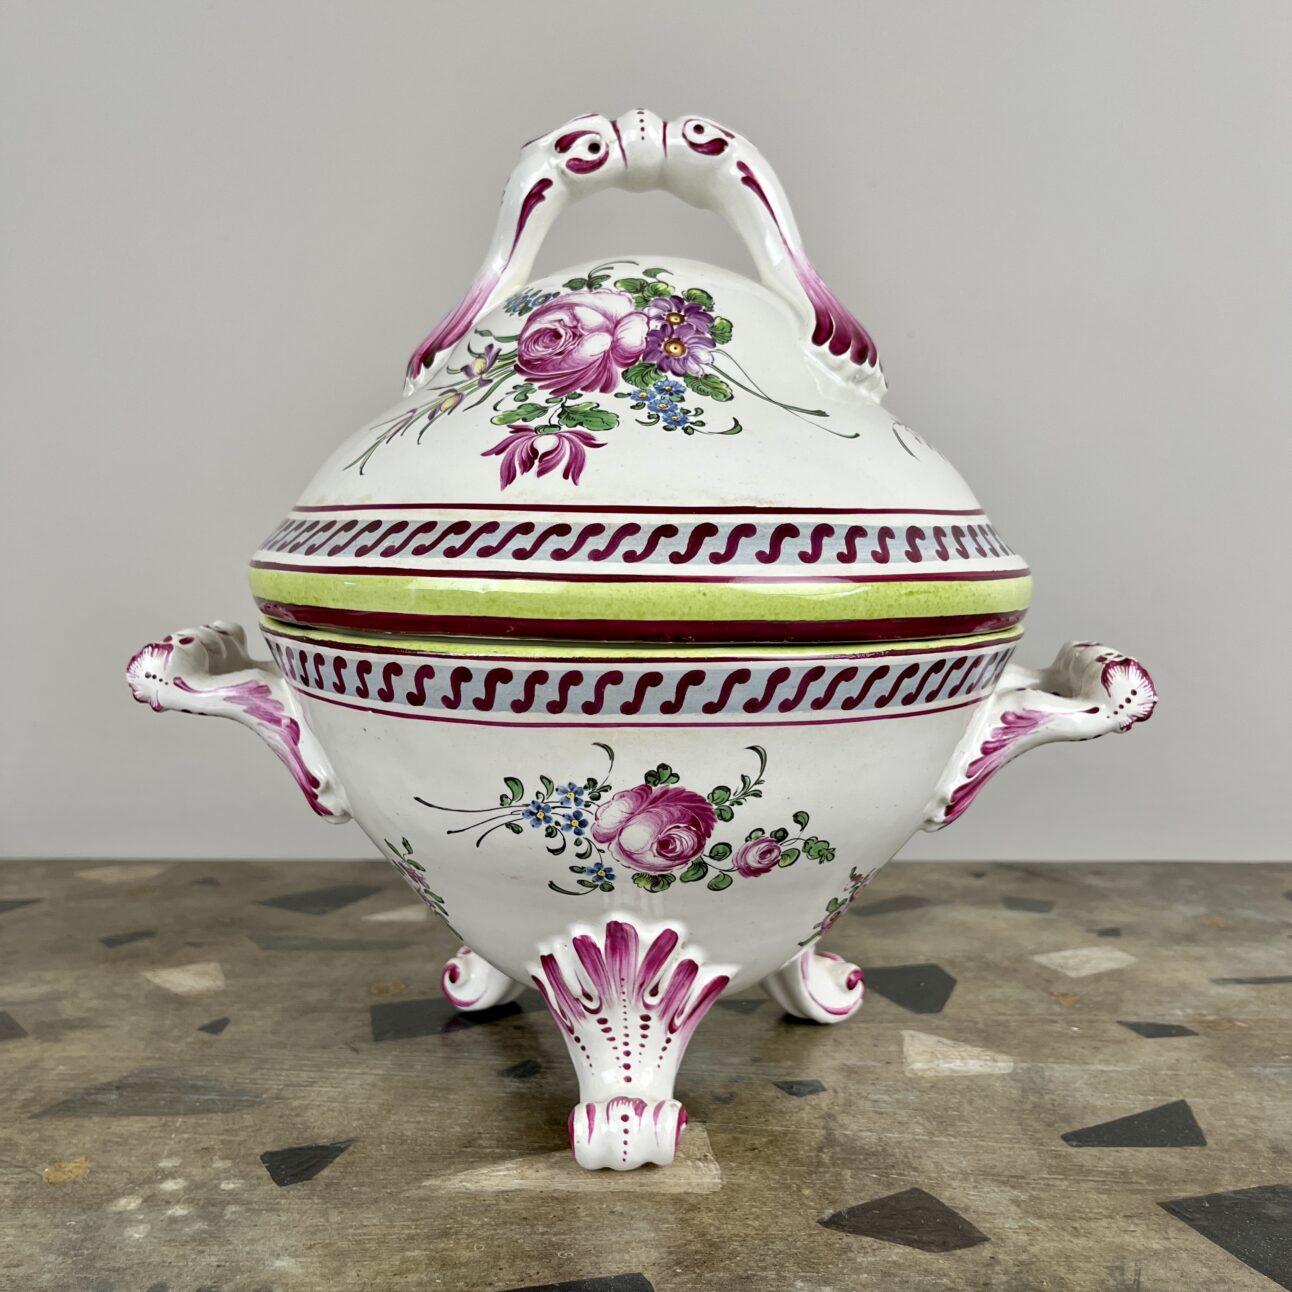 A large cauldron-shaped French faience tureen raised on scrolling tri-form feet, with twin handles and domed lid decorated with hand-painted sprays of roses and borders of vitruvian scrolls. This tureen was made in France in the late 19th century